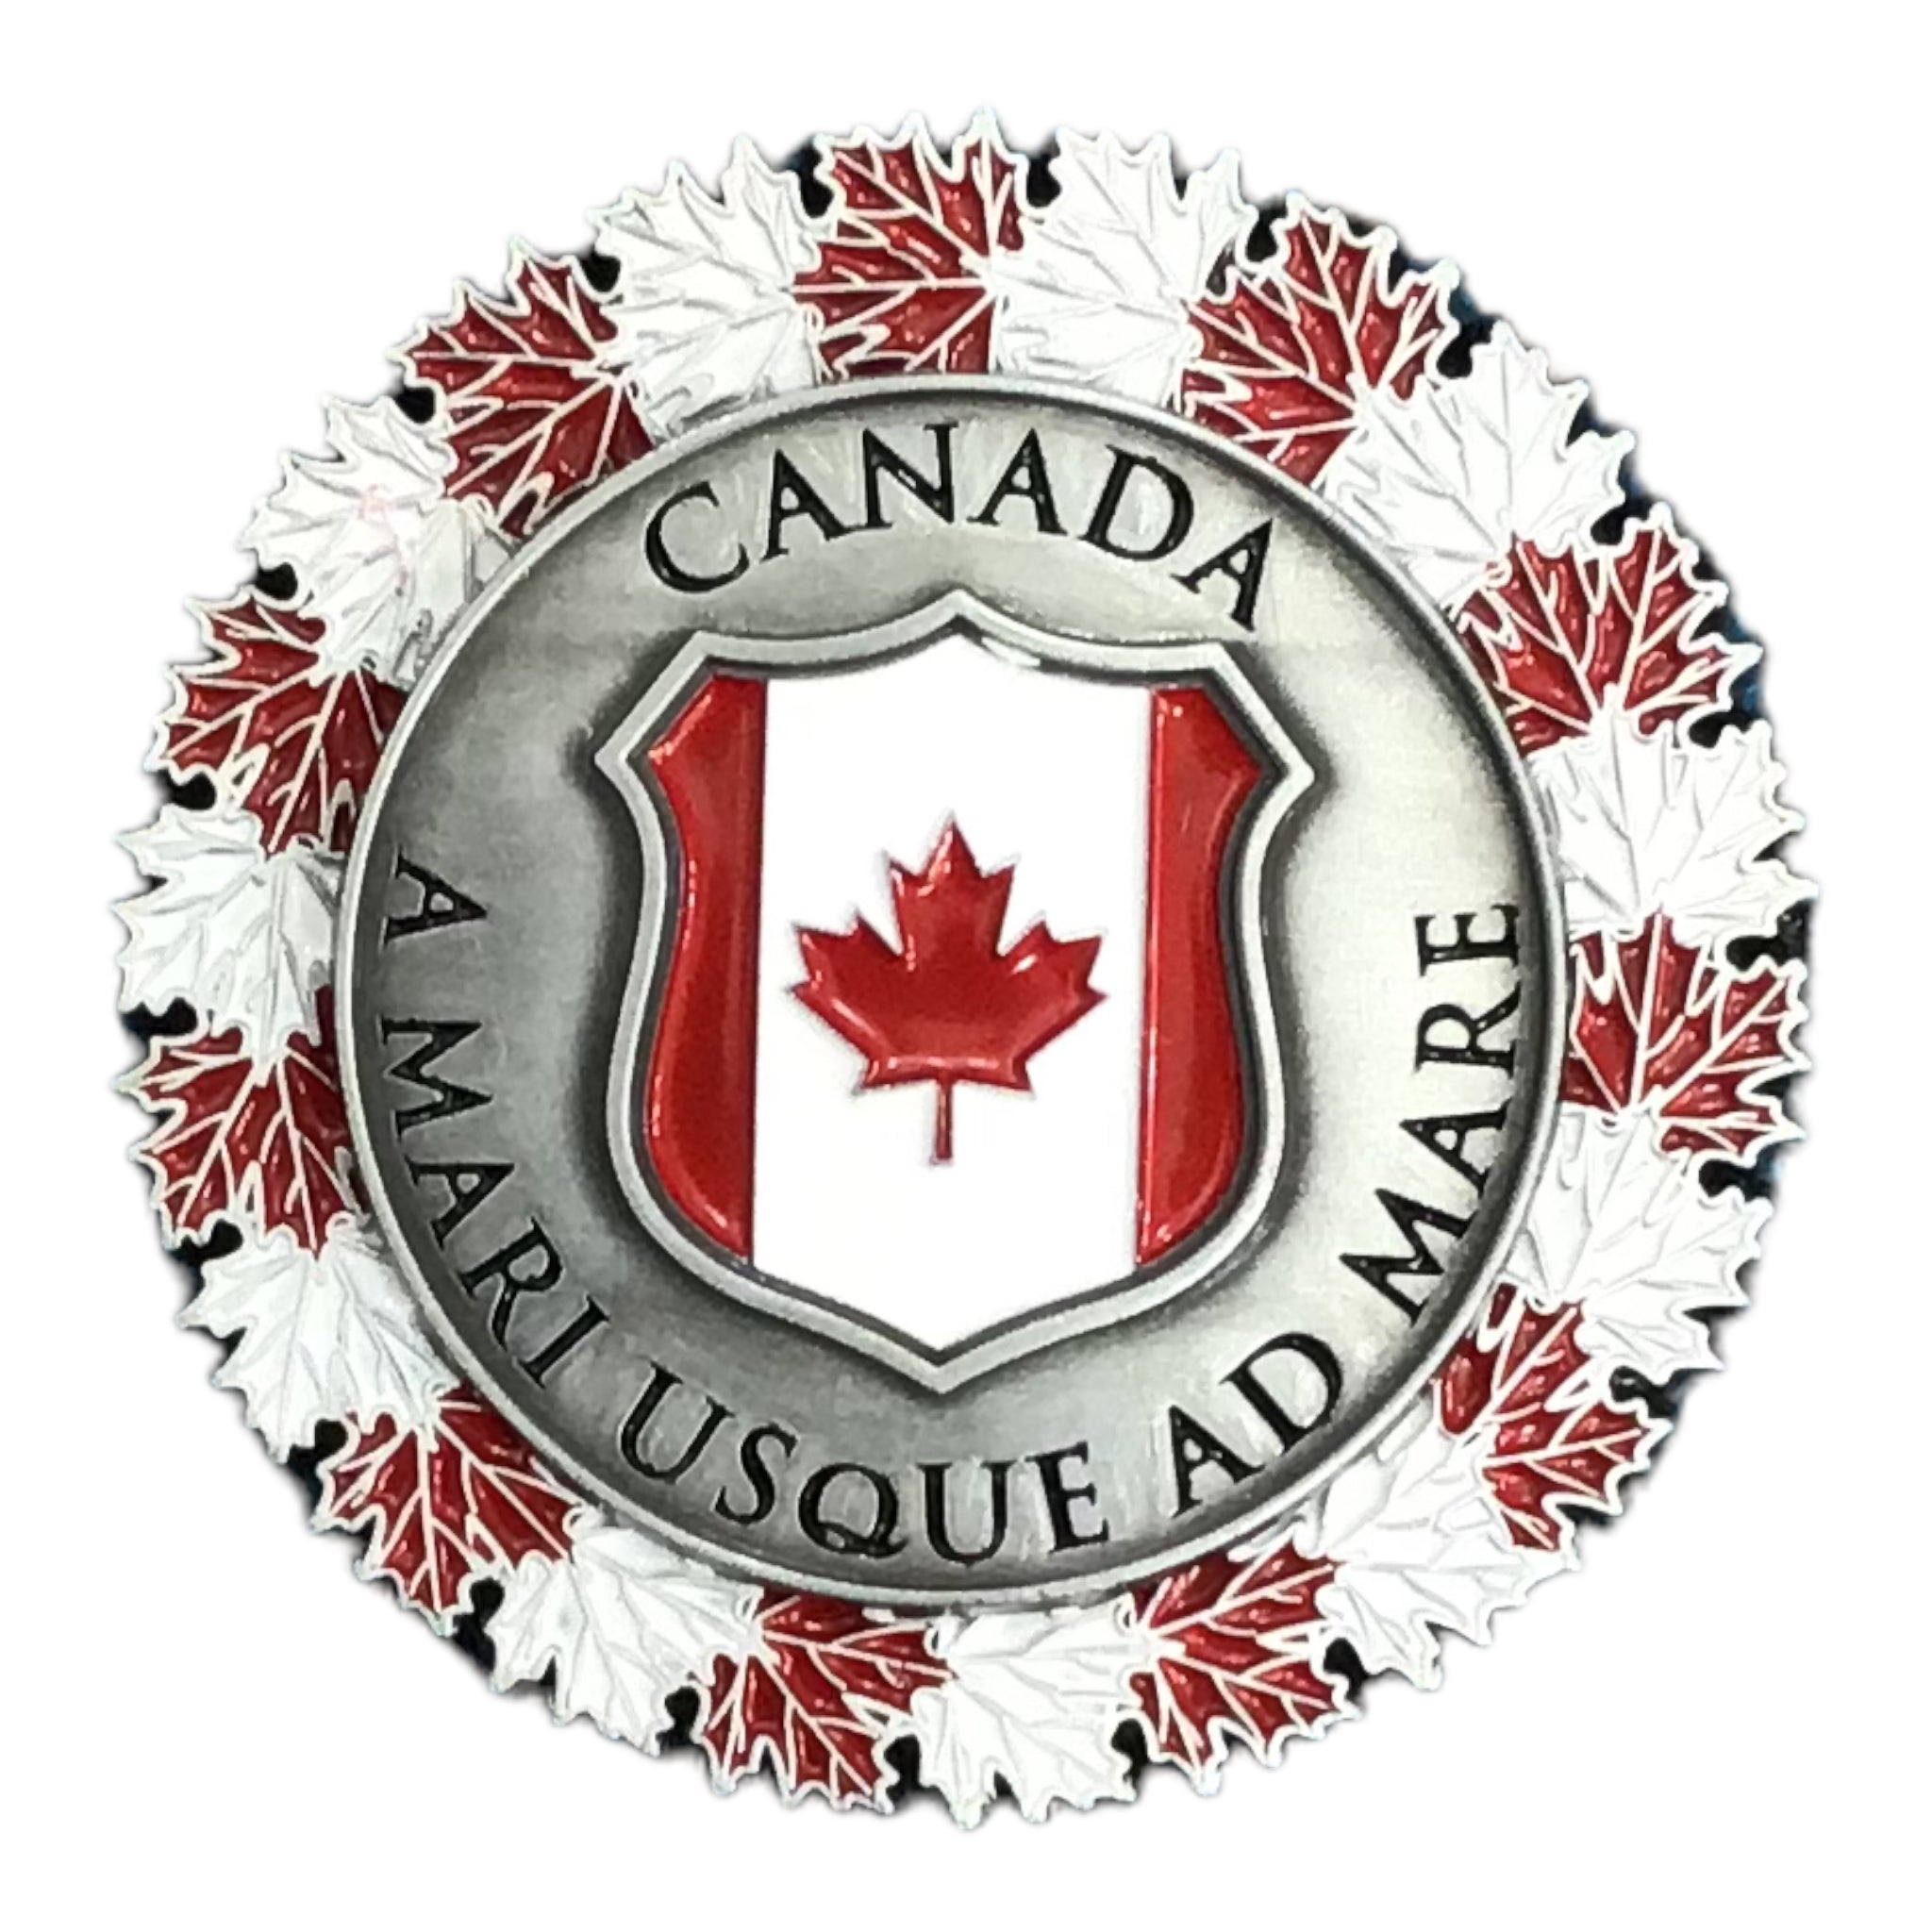 CANADA SPINNER MAGNETS | It Spins - It Swirls - It Makes You Twirl!